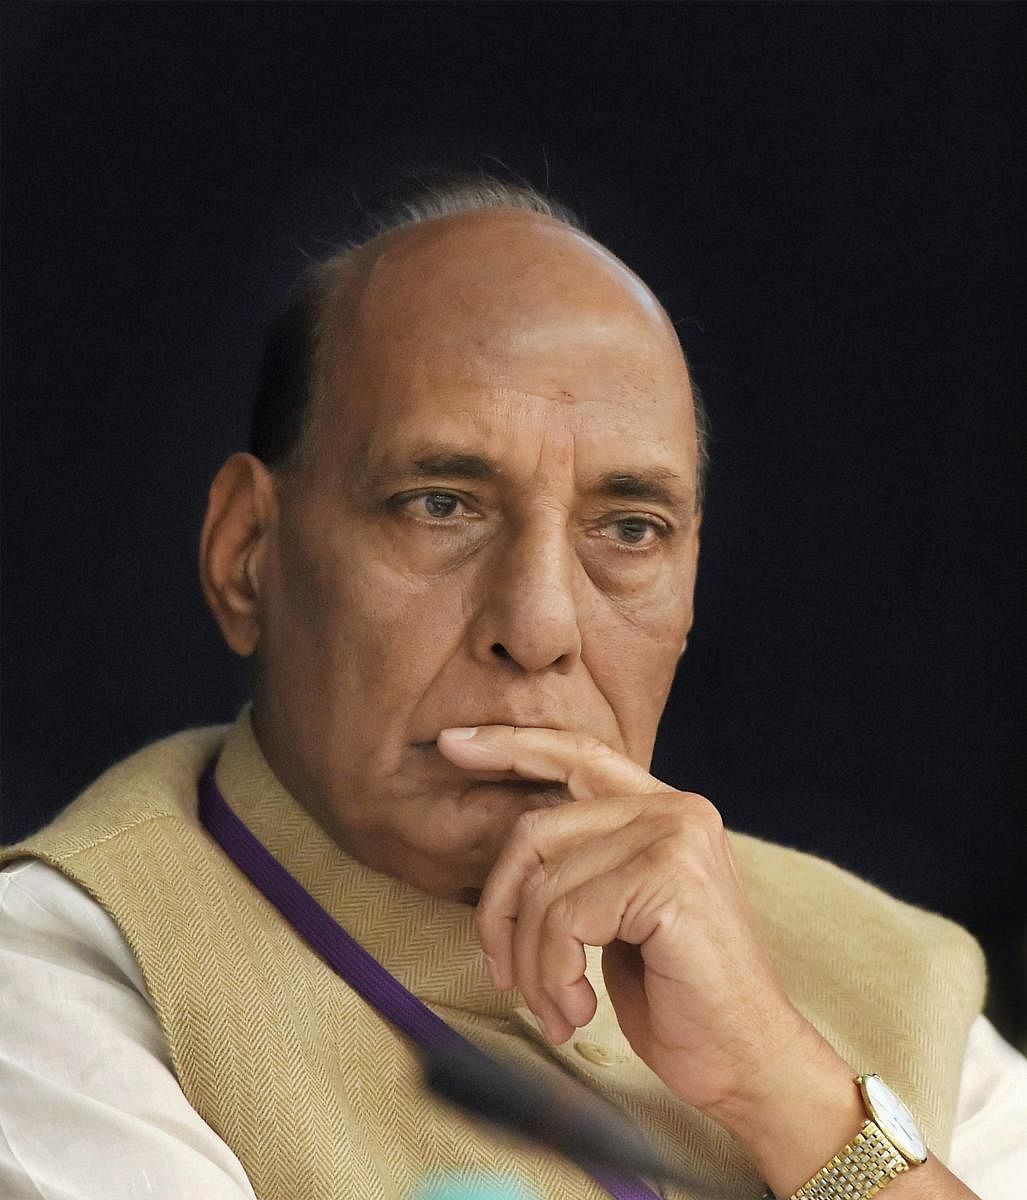 Naxalism on its last leg in the country: Rajnath